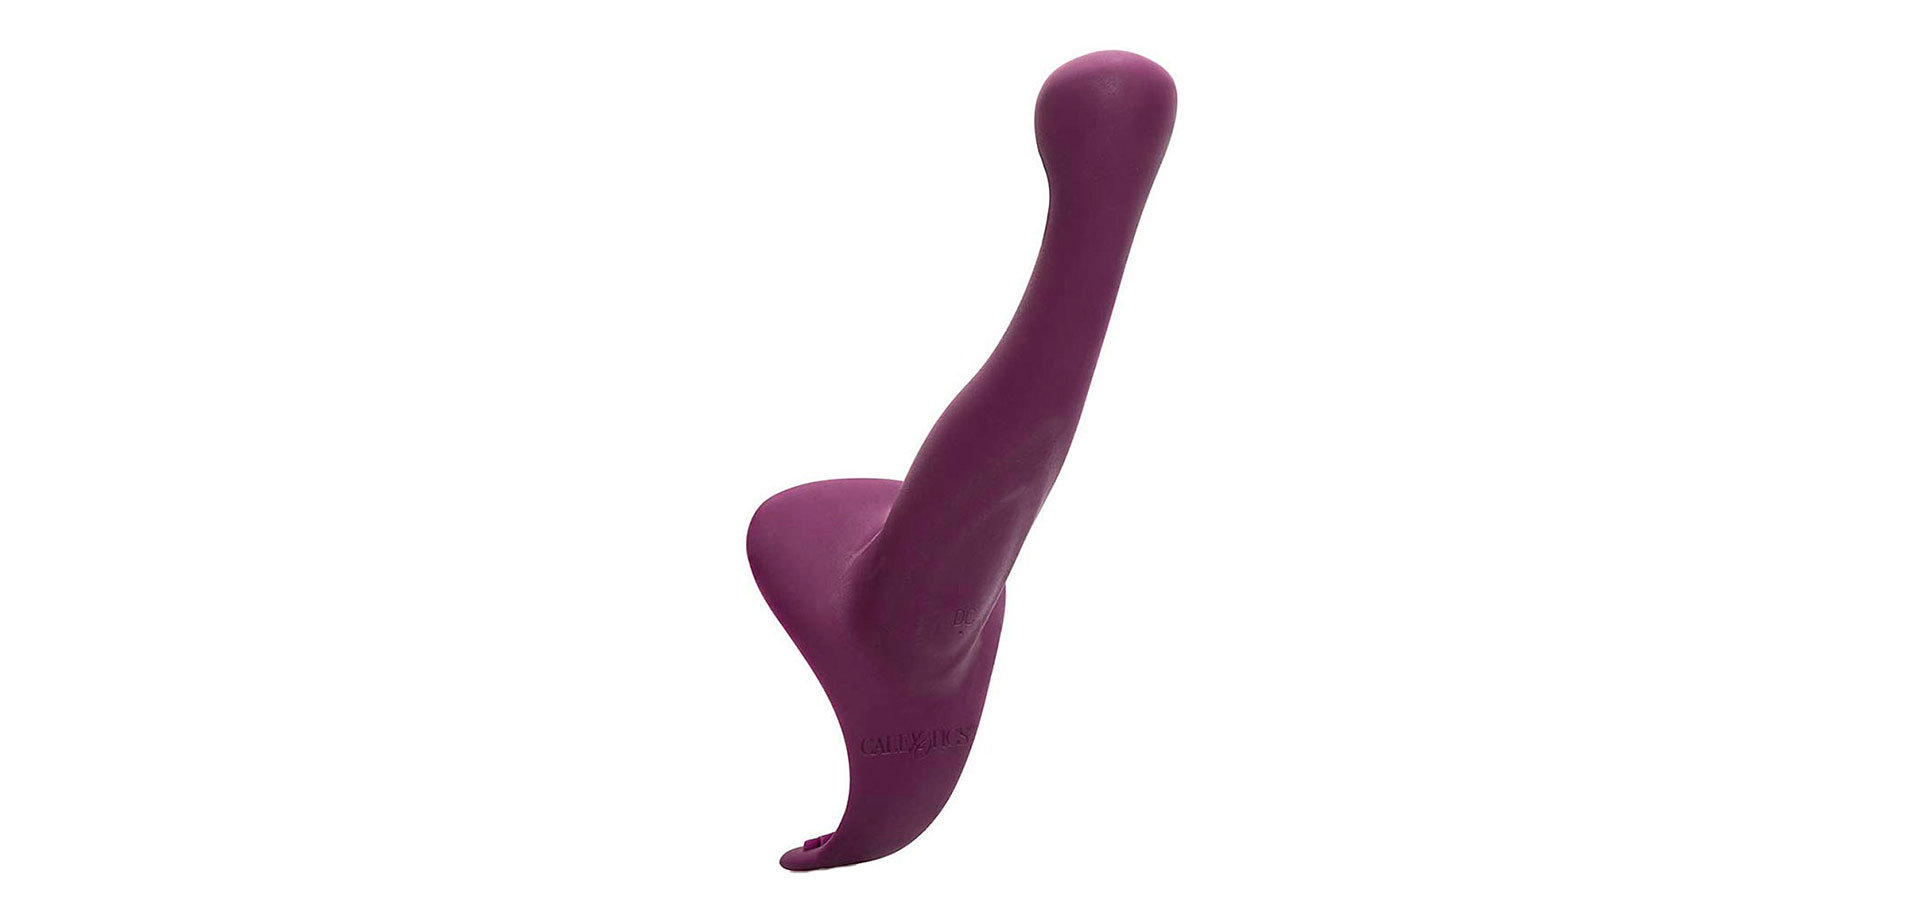 Lesbian Vibrating Sex Toy for Couples.